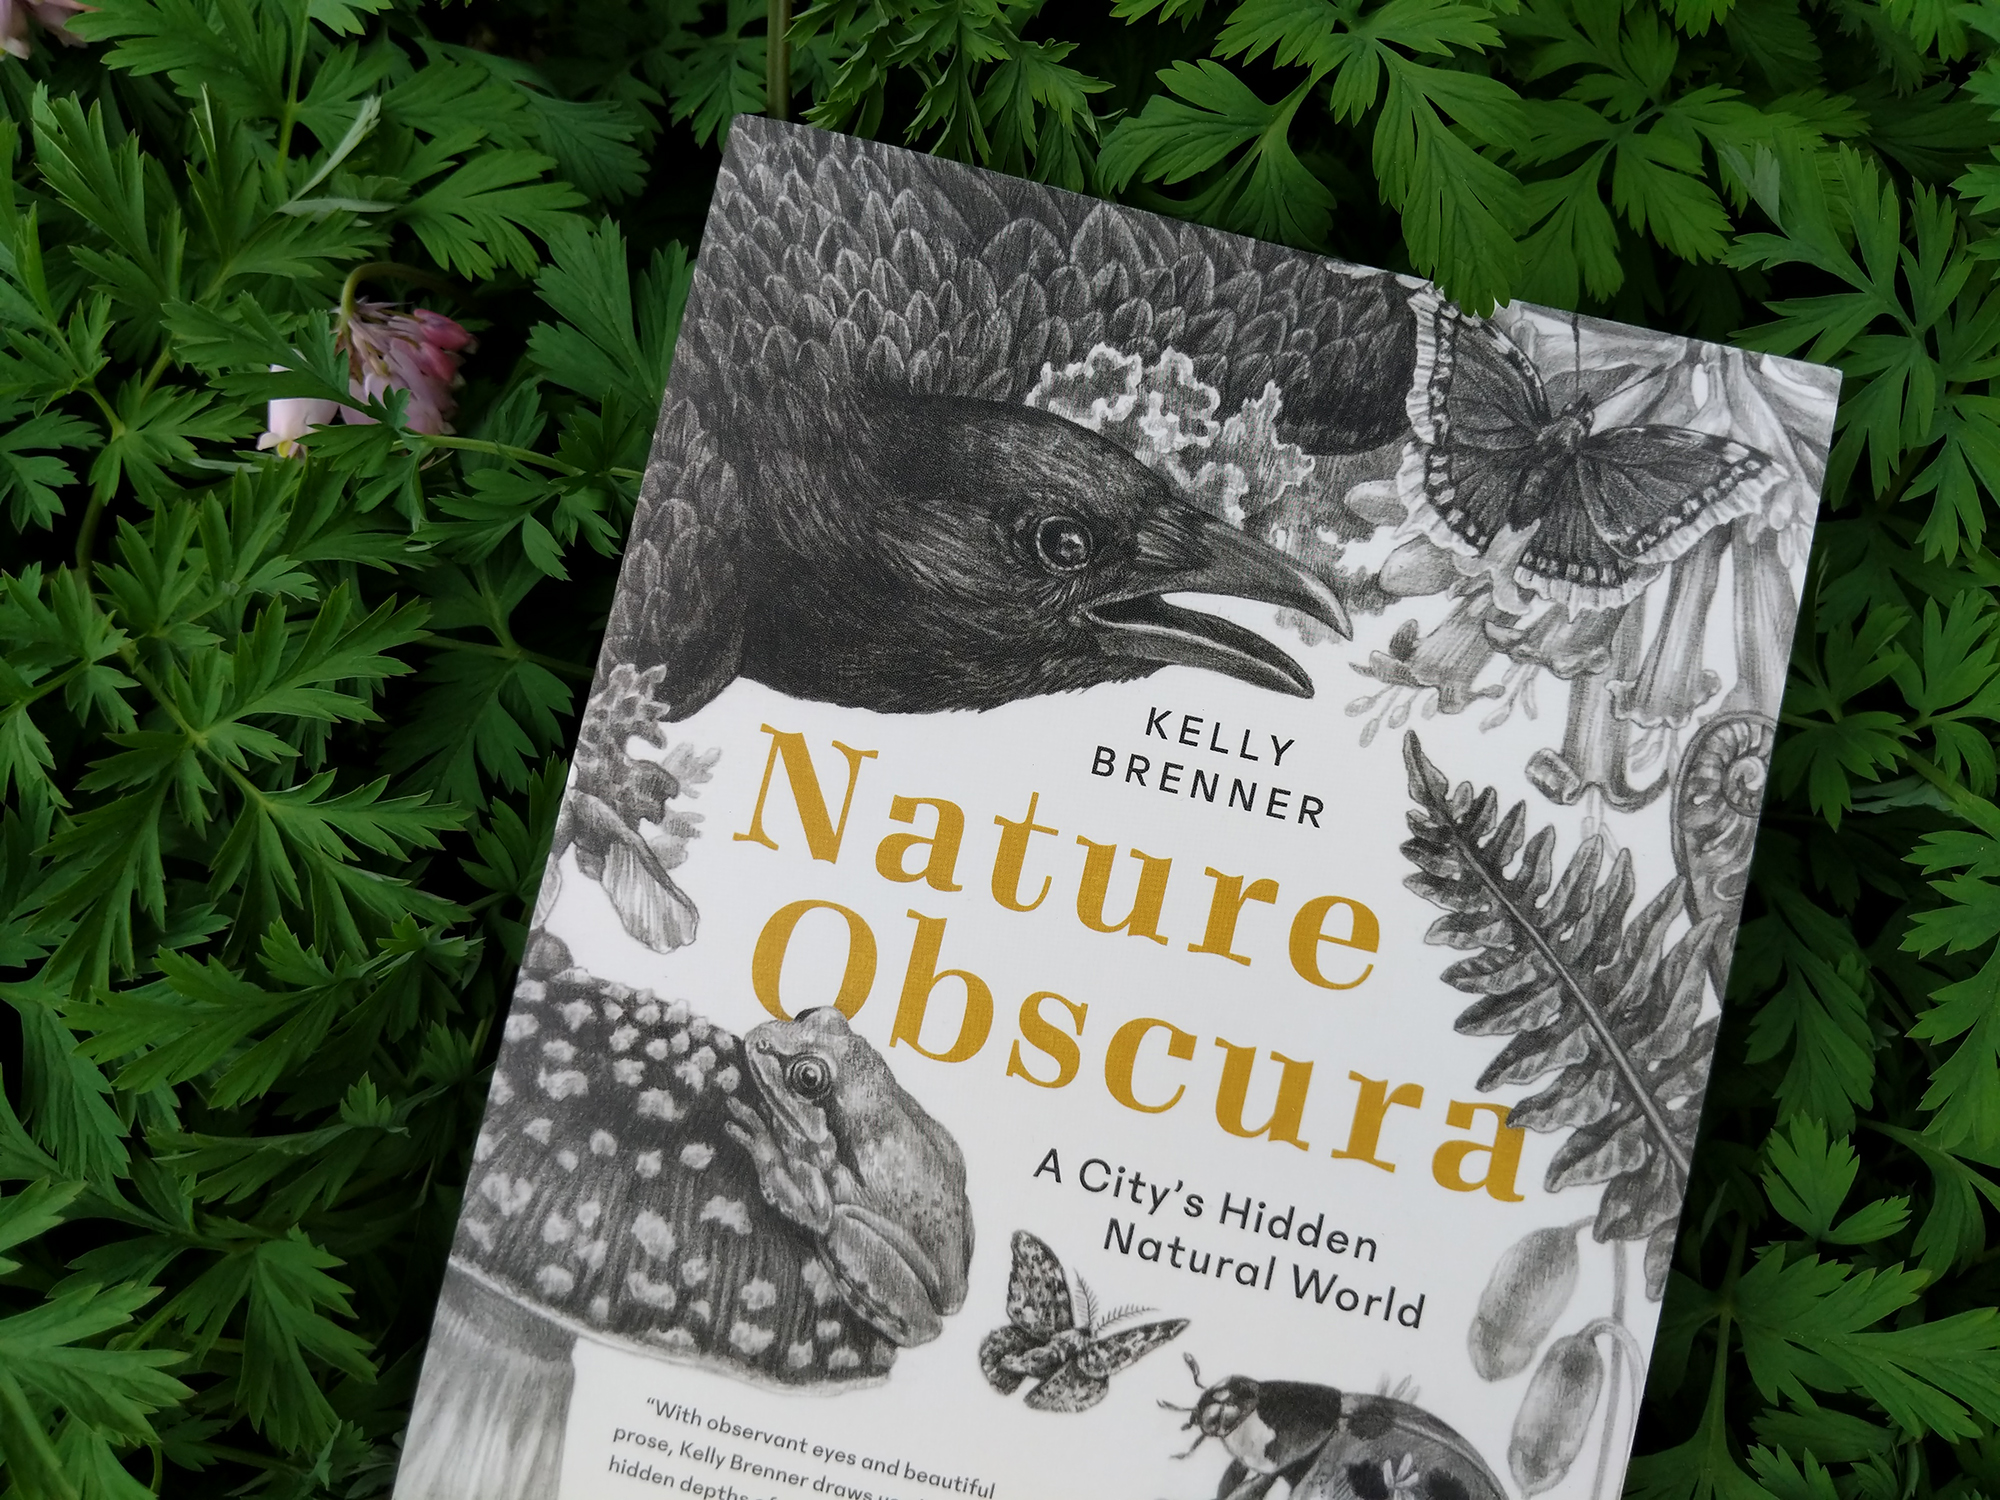 Kelly Brenner in Conversation with Seattle Audubon